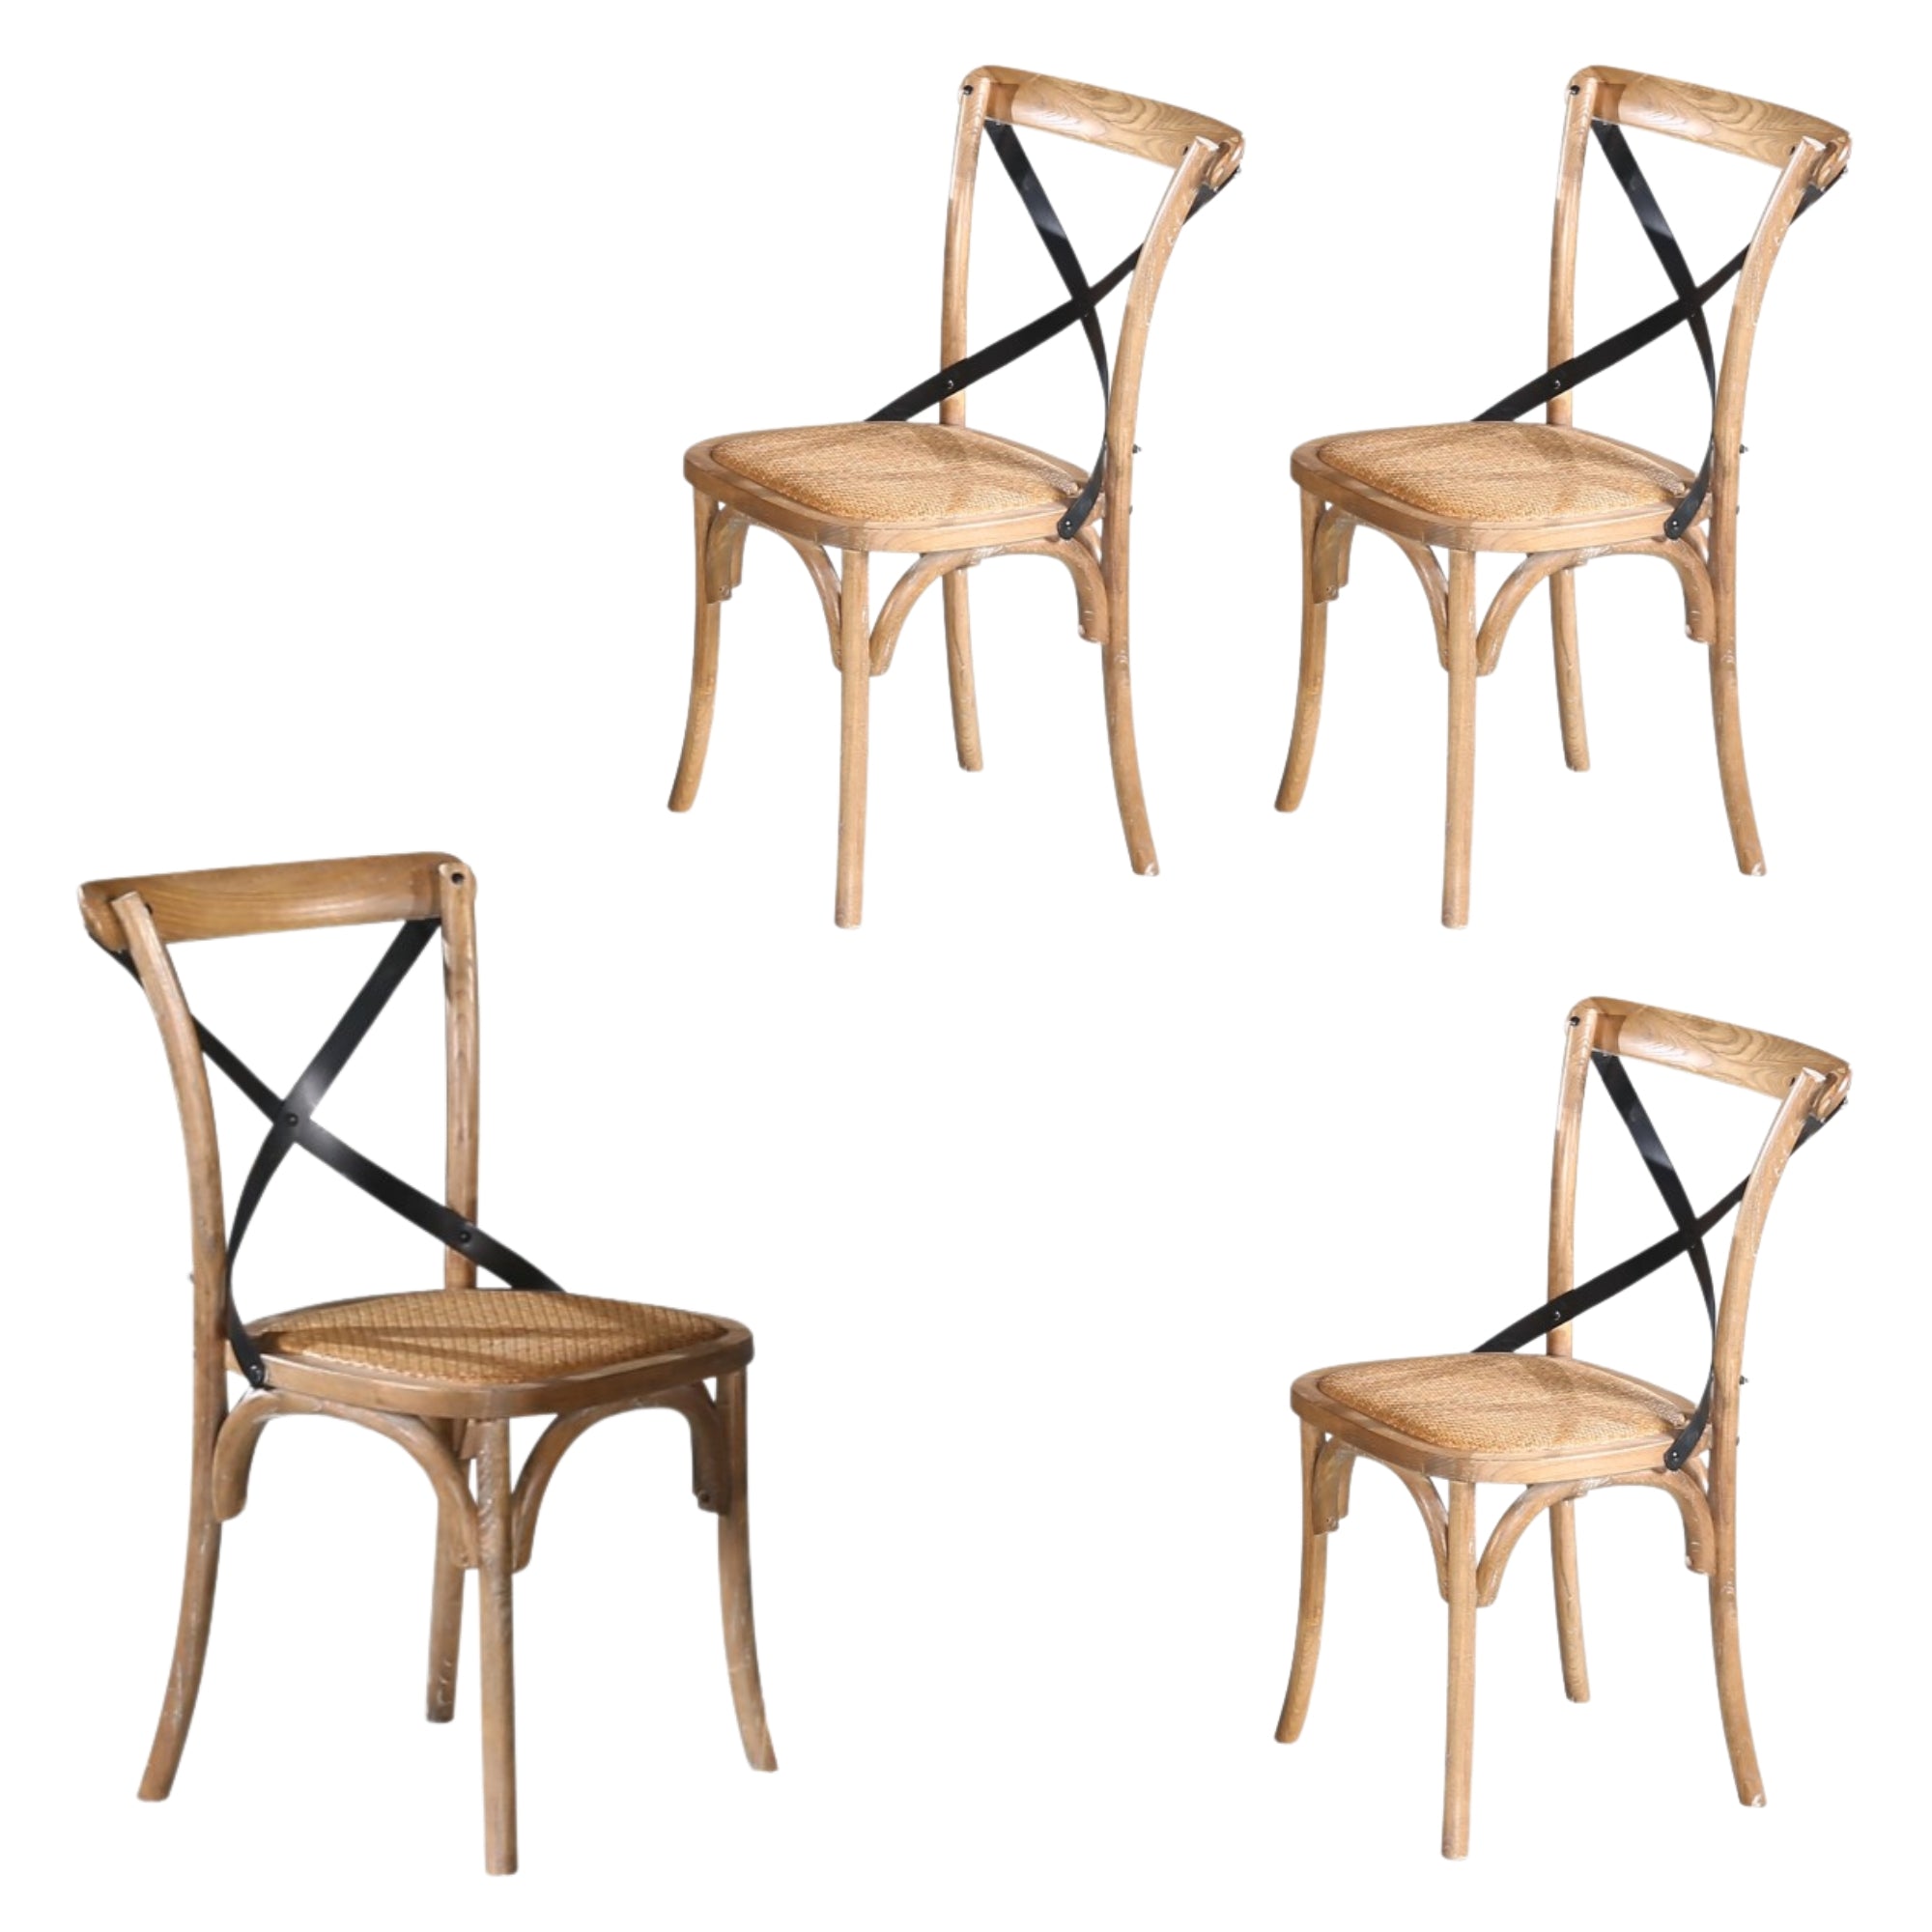 Birchwood Woven Seat X-Back Dining Chairs, 4pc Set, Natural